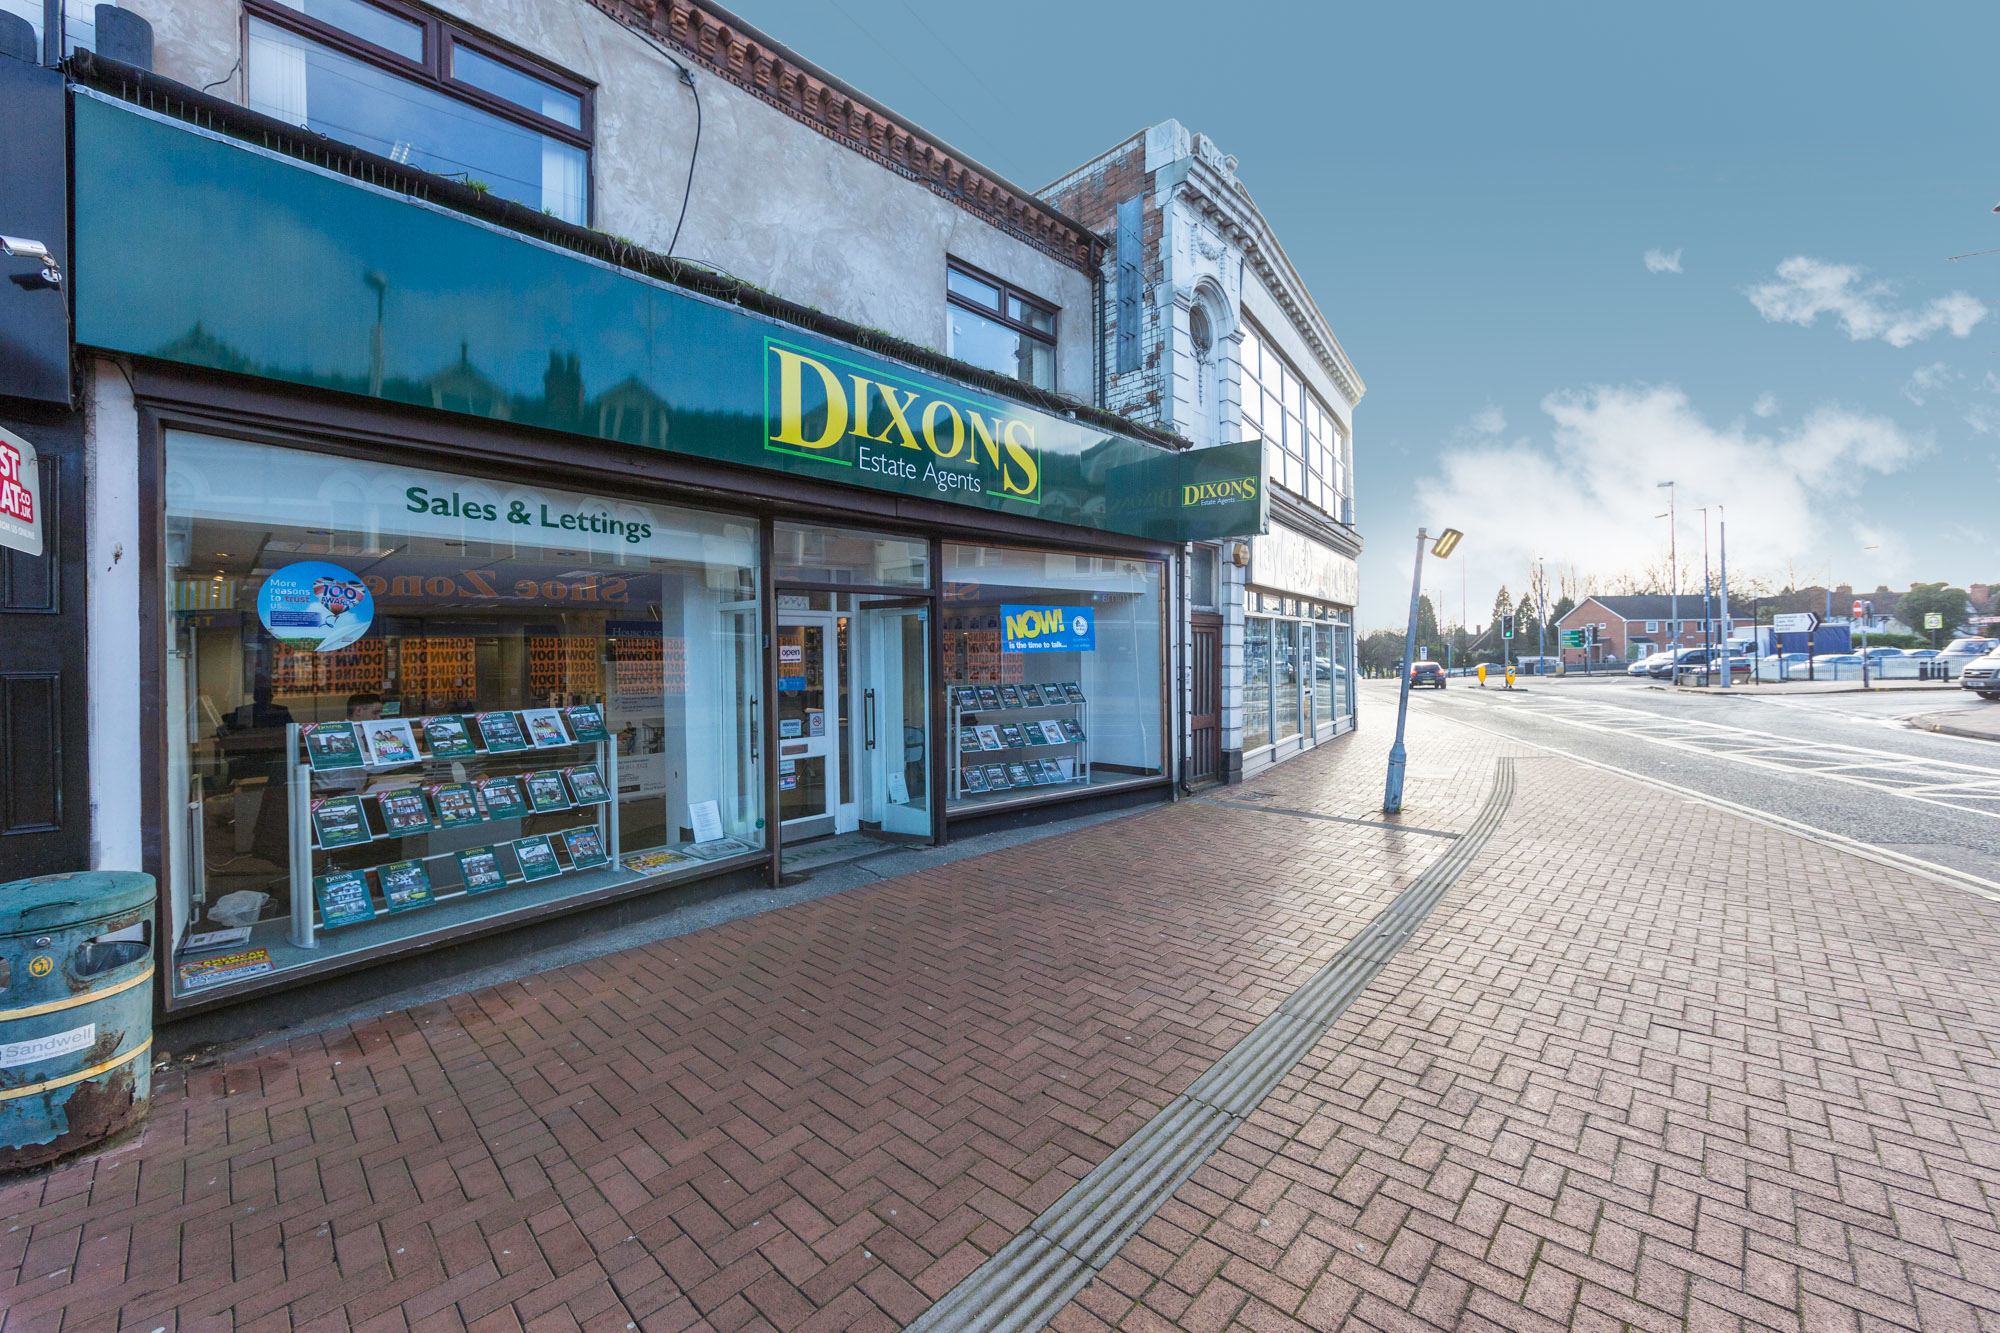 Dixons Sales and Letting Agents Bearwood Smethwick 01213 690725